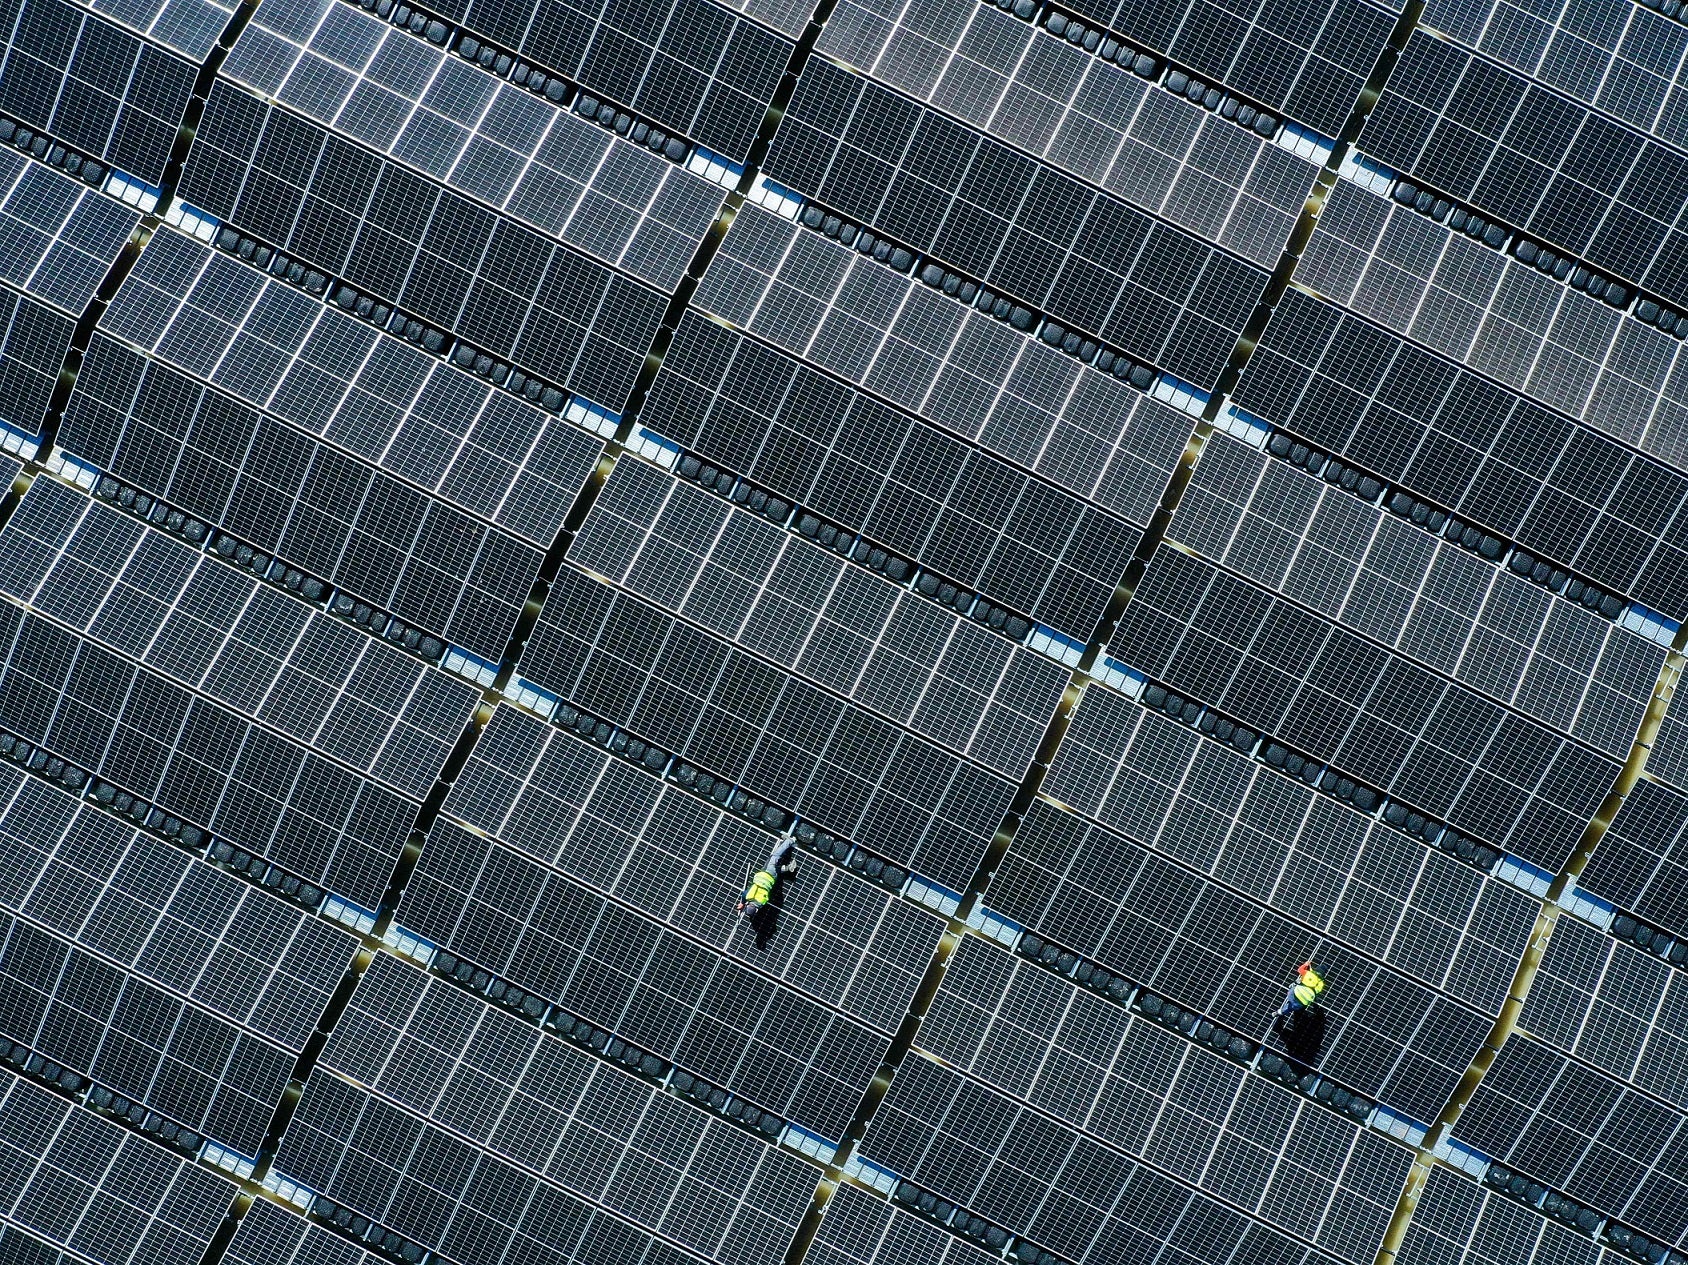 An aerial view shows solar panels at a floating photovoltaic plant on the Silbersee lake in Haltern, Germany’s largest floating solar park, on 22 April, 2022